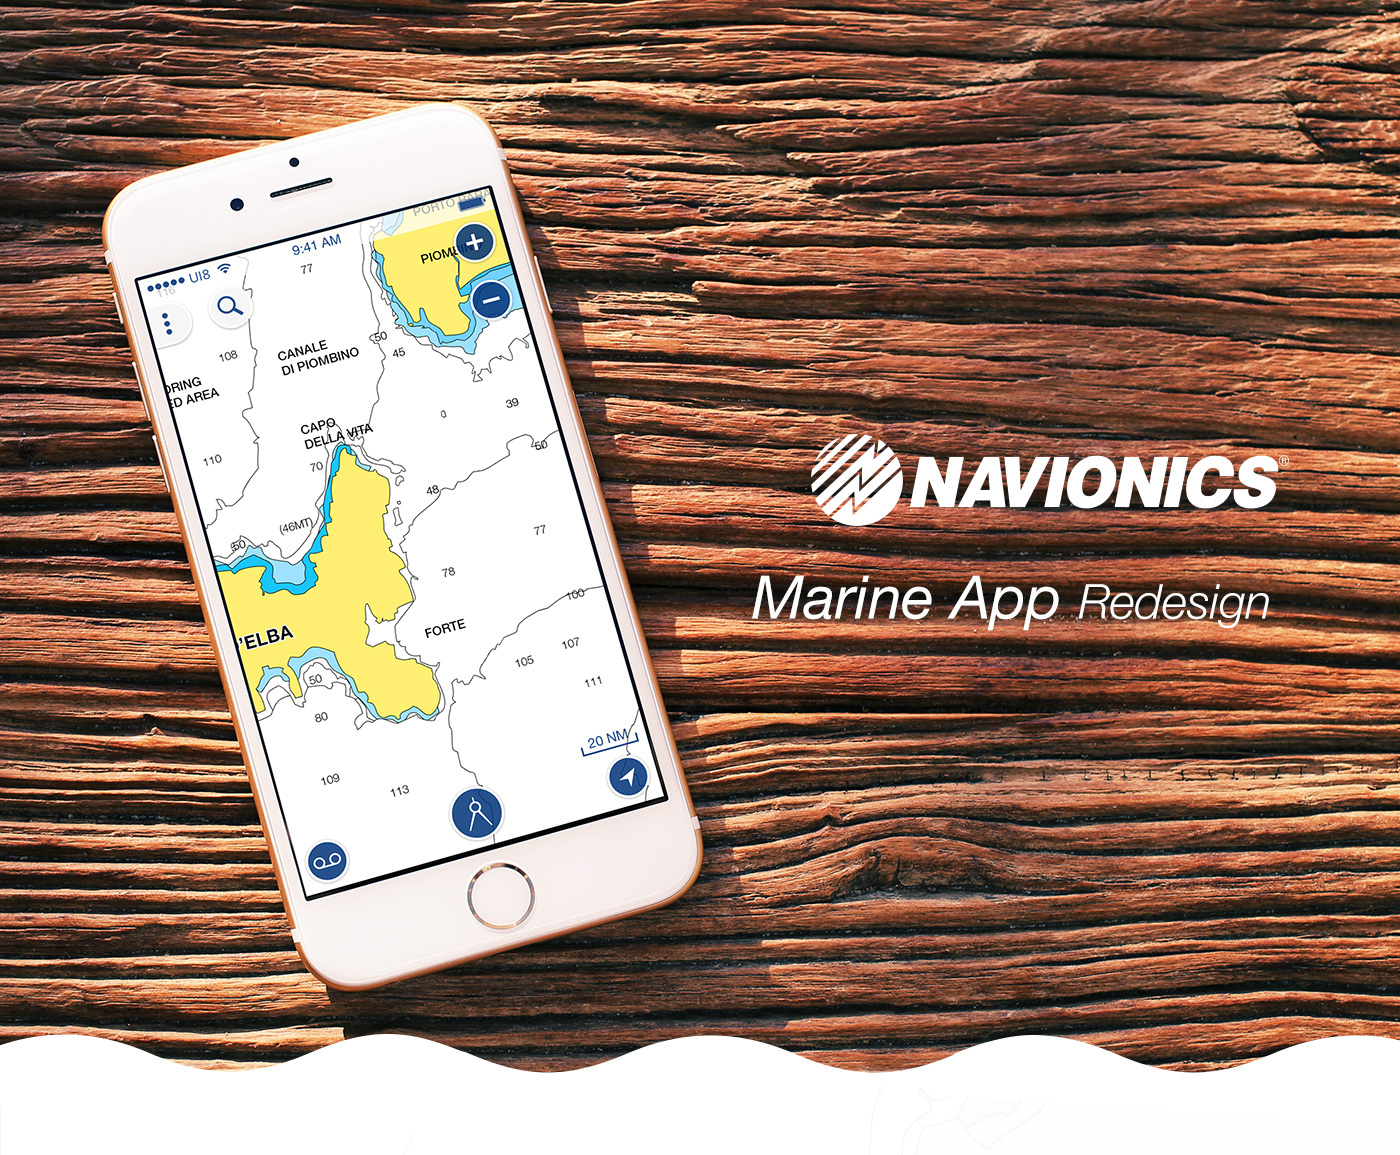 app mobile geolcalization gps route navigation sea blue White map